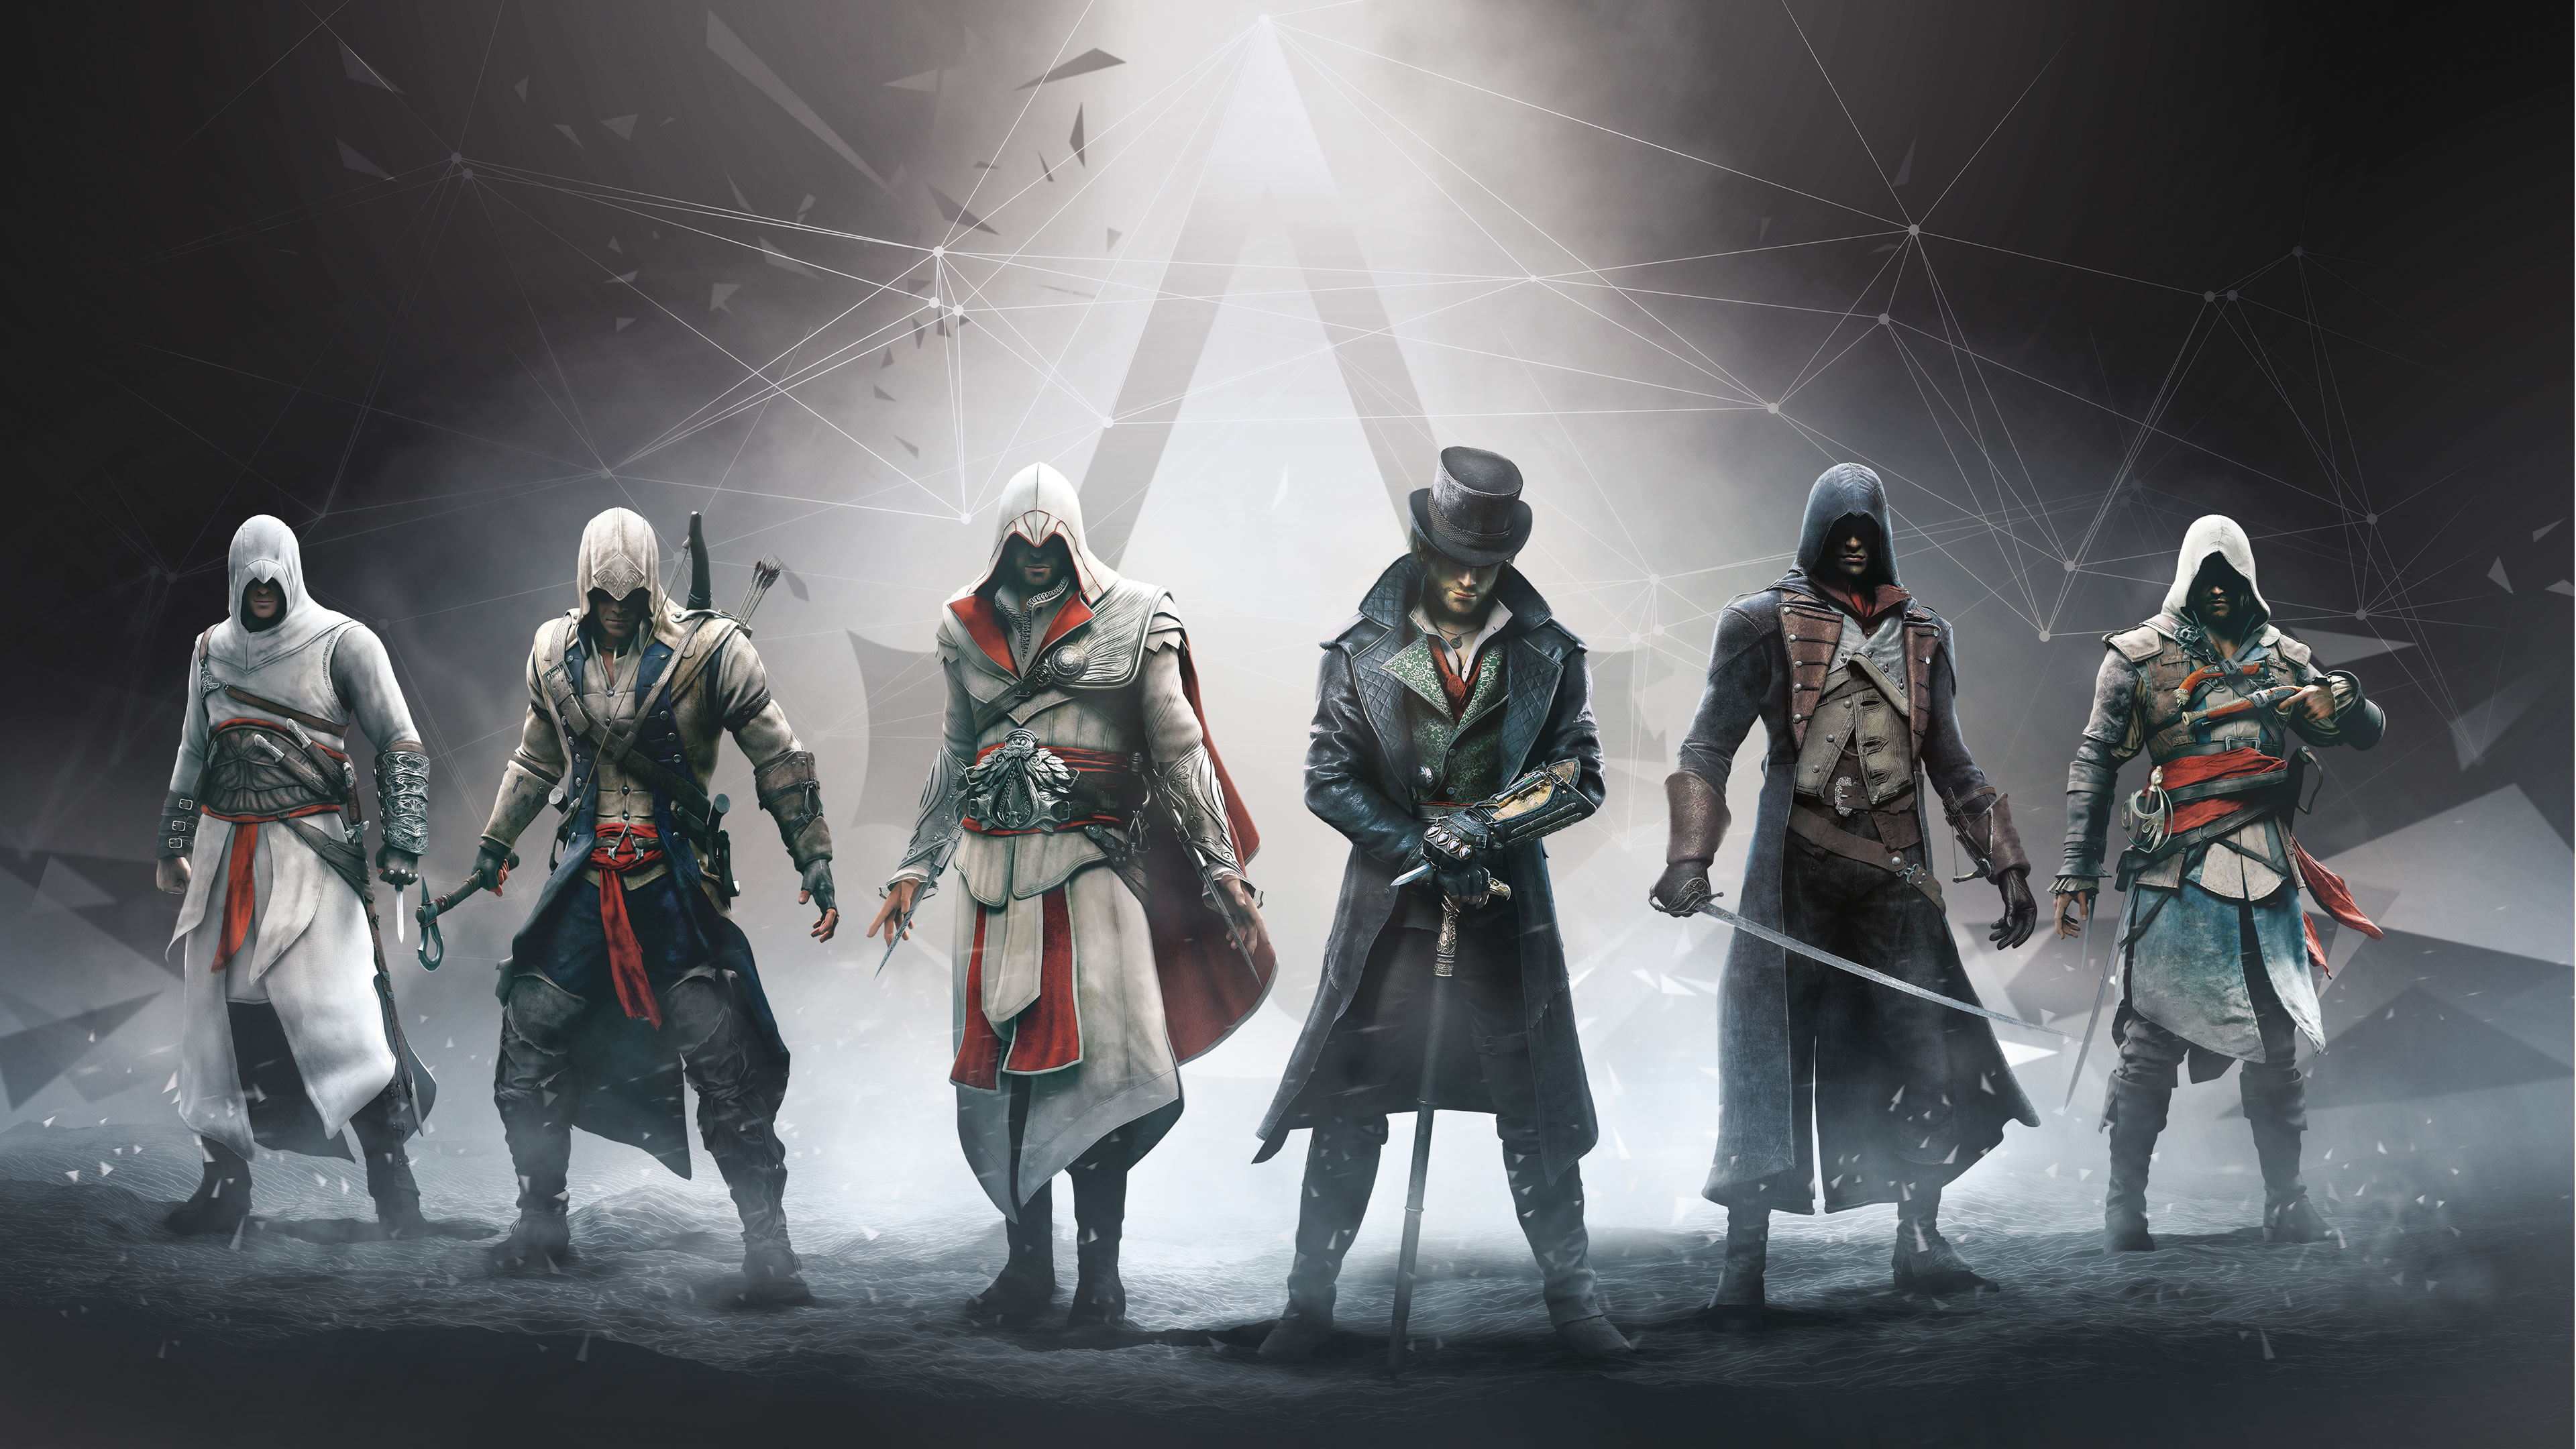 assassin's creed, ezio (assassin's creed), altair (assassin's creed), video game, edward kenway, connor (assassin's creed), arno dorian, jacob frye